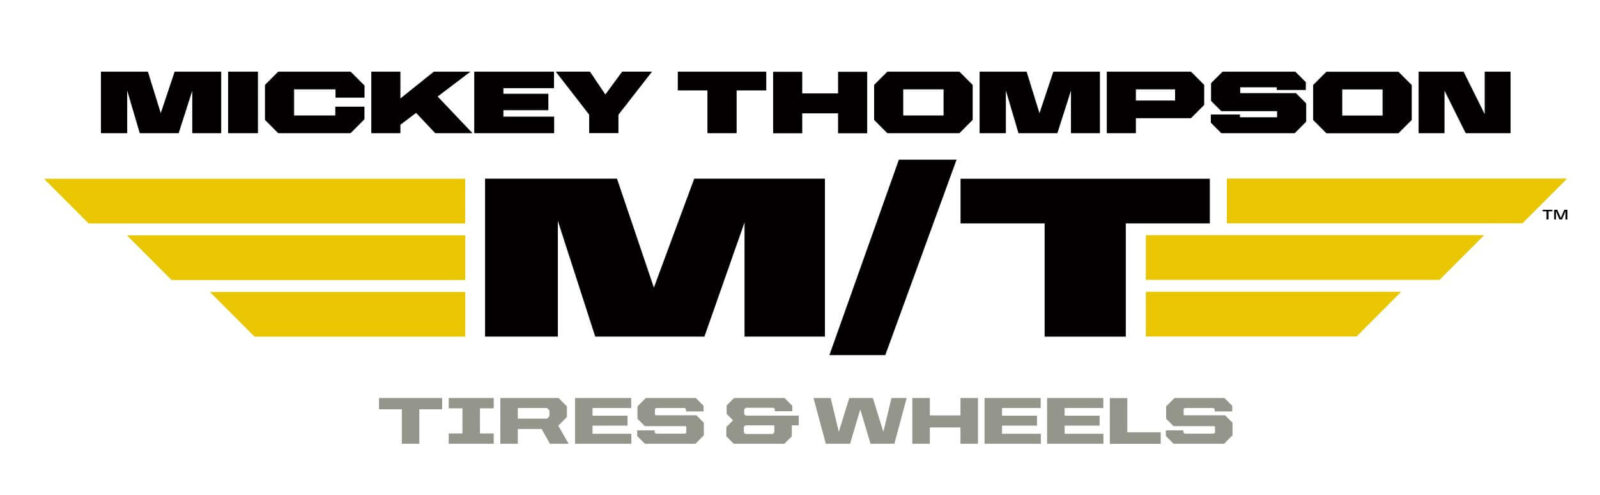 Mickey Thompson Reviews - Truck Tire Reviews